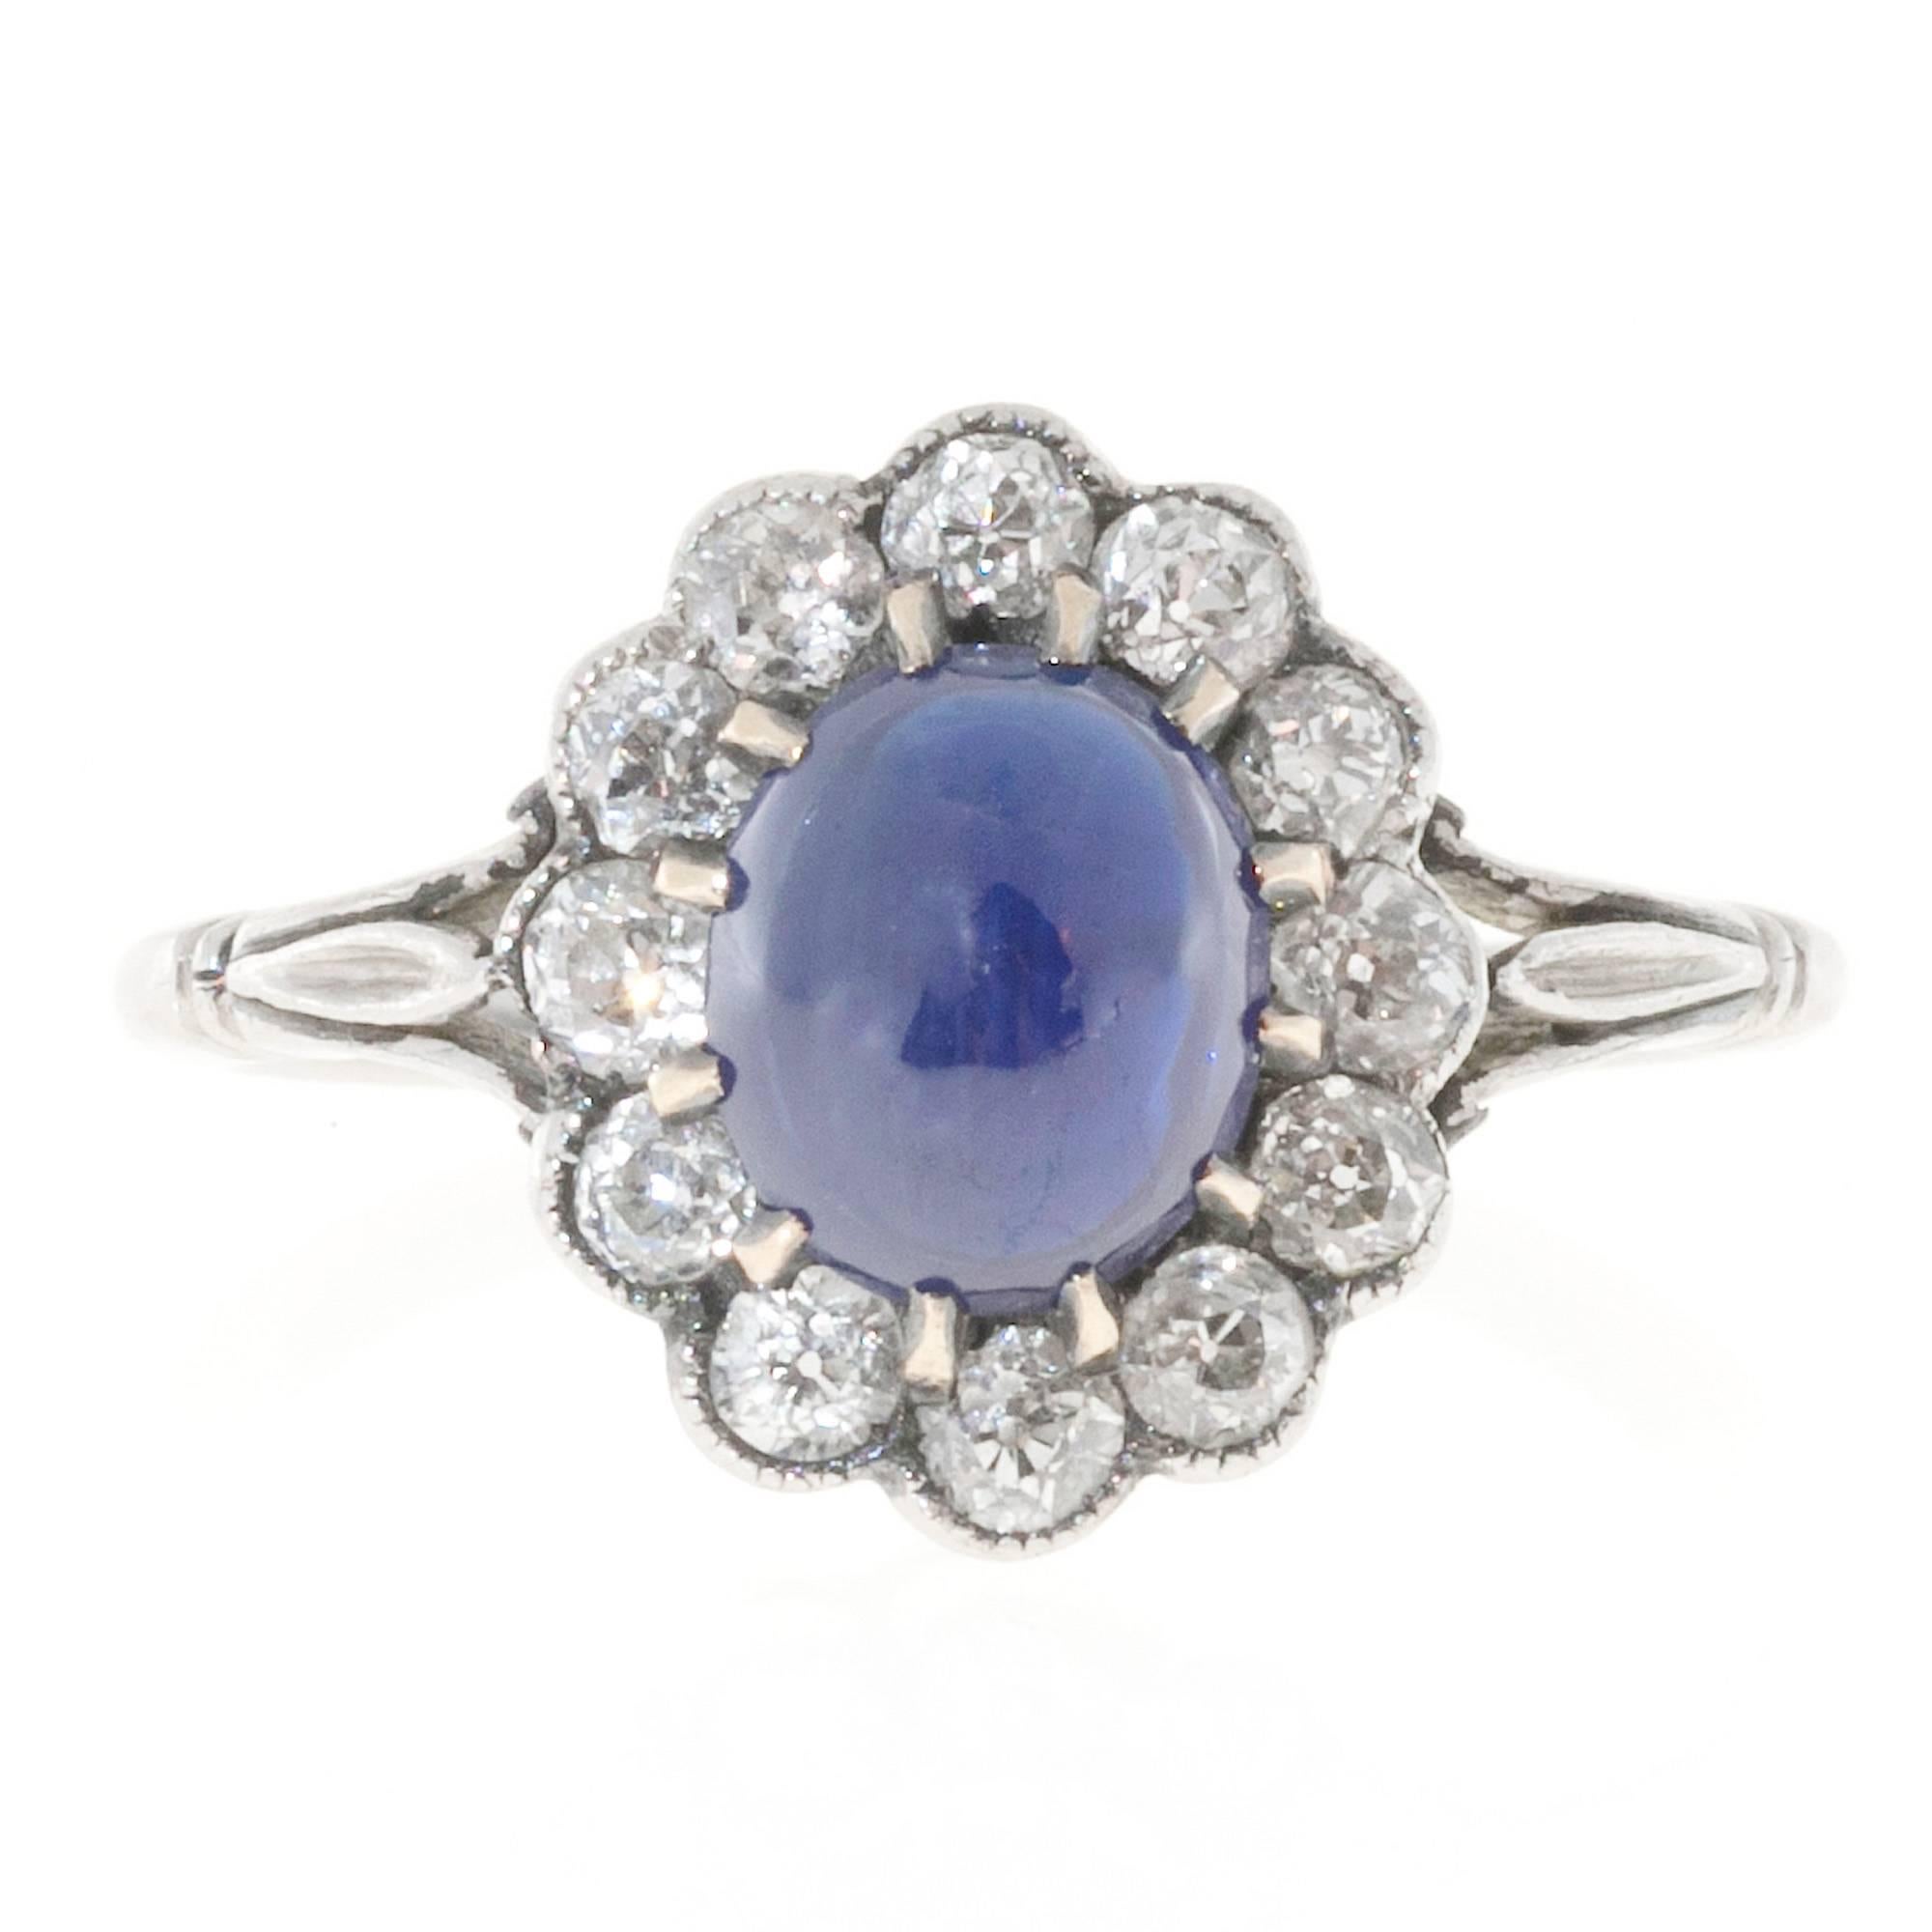 Platinum engagement ring circa 1910-1920 with old mine cut diamond halo and a high dome natural sugar loaf cornflower blue cabochon Sapphire.

1 Oval natural cabochon Sapphire 7.9 x 6.6 x 3.9mm, CMG Type II inconclusive approximately 1.75ct. Extra